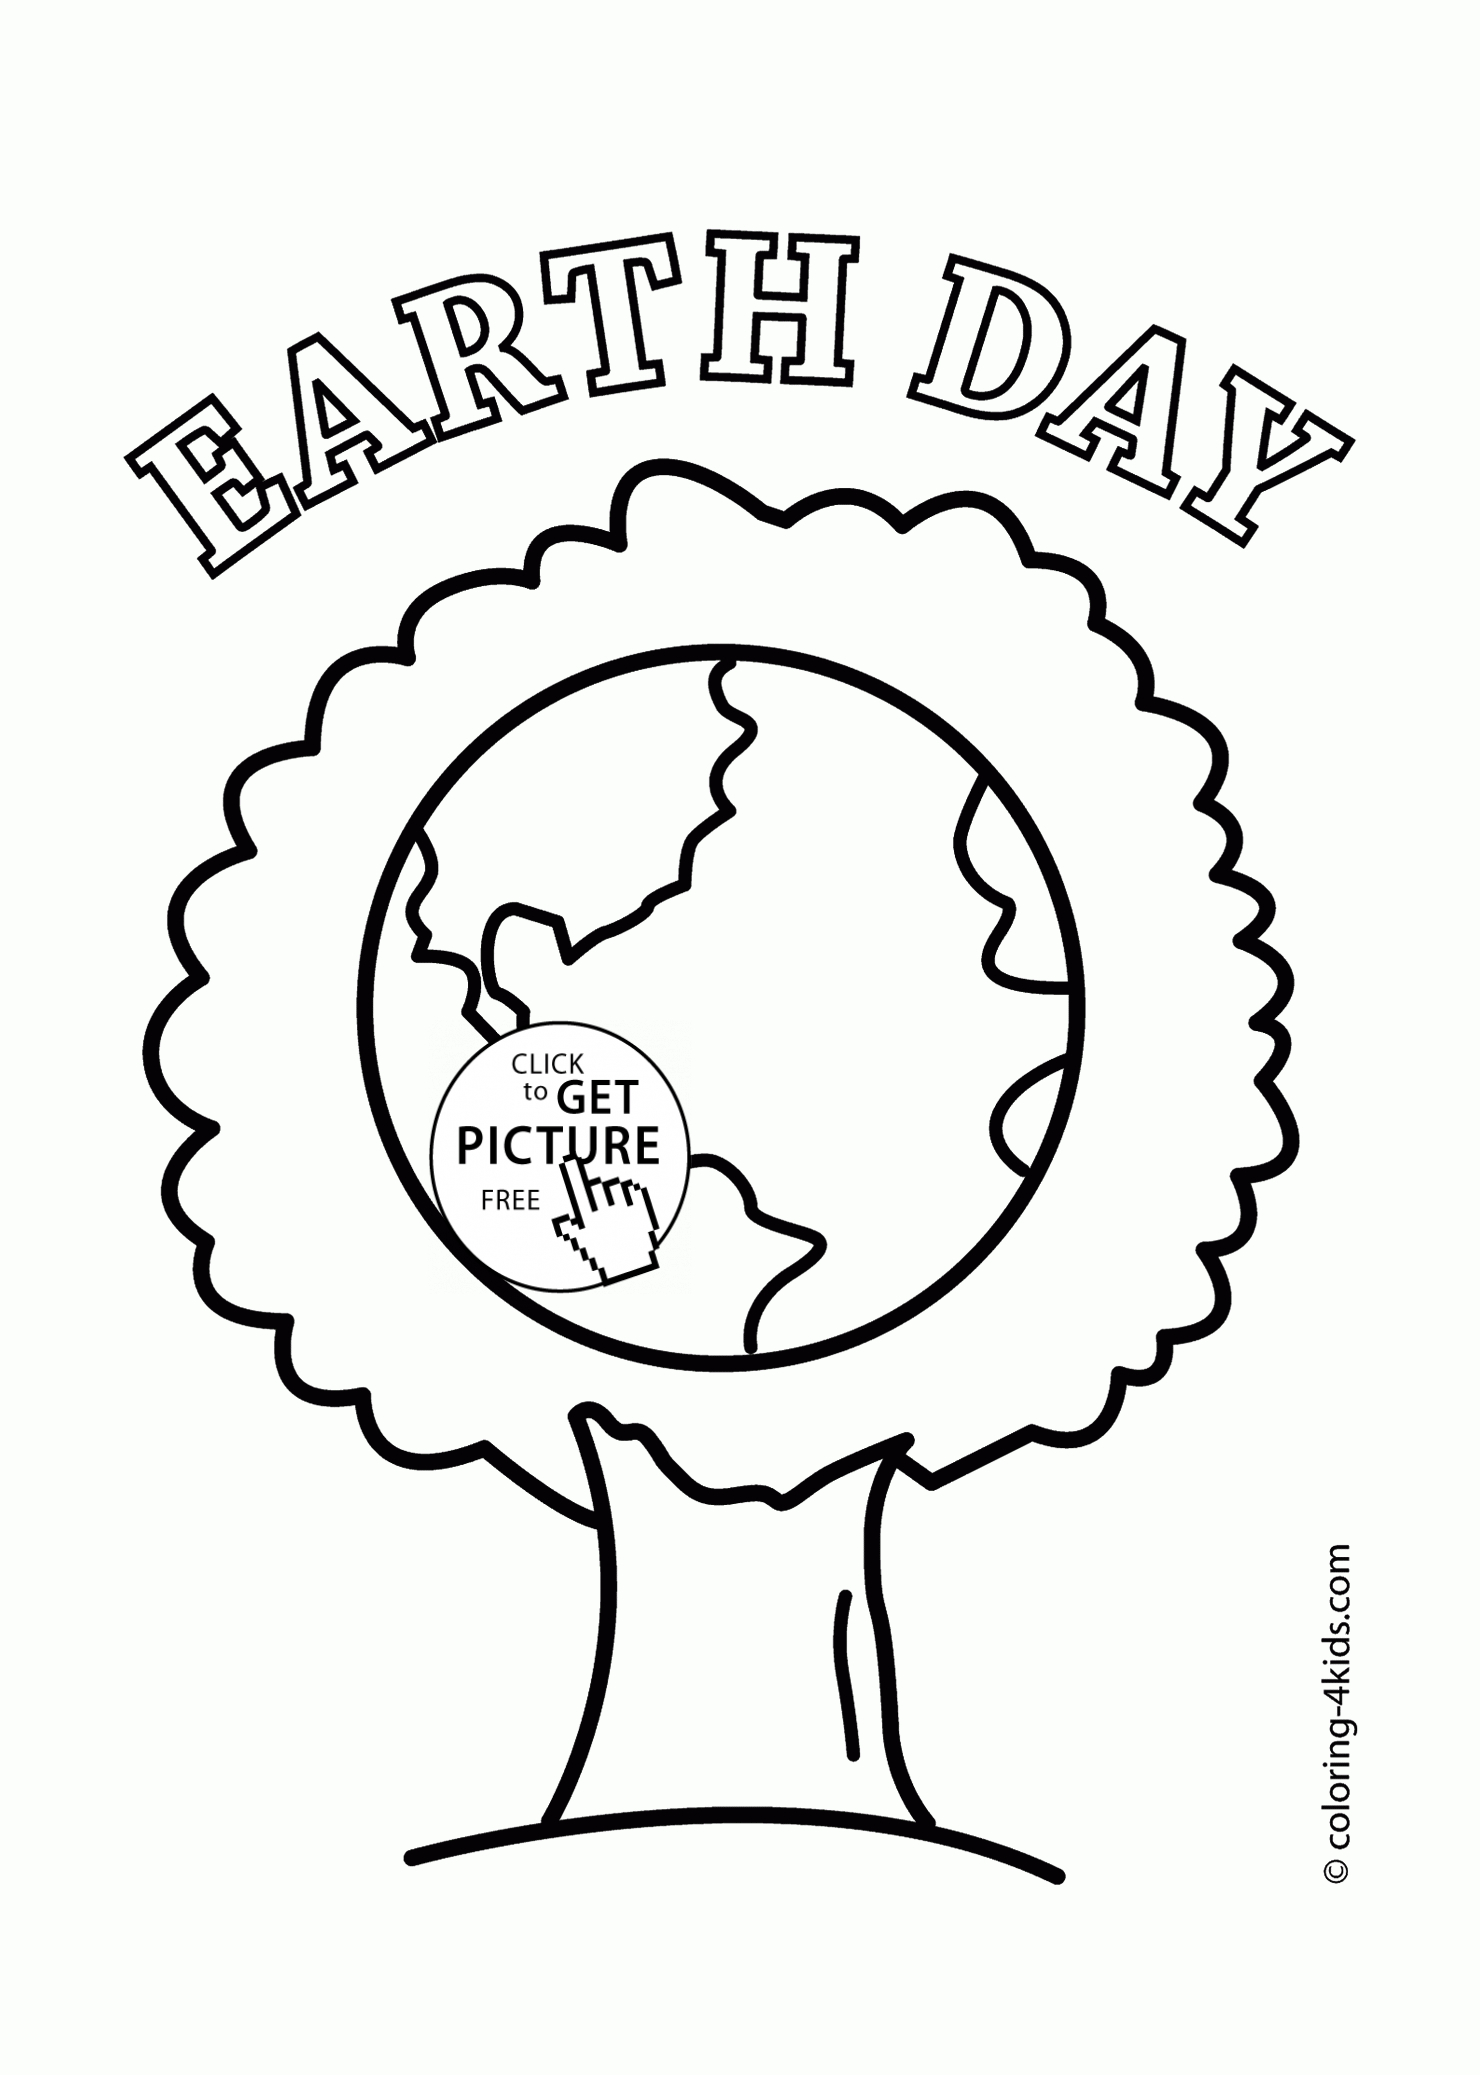 Earth Day Coloring Pages Beauty Tree Earth Happy Earth Day Coloring Page For Kids Coloring